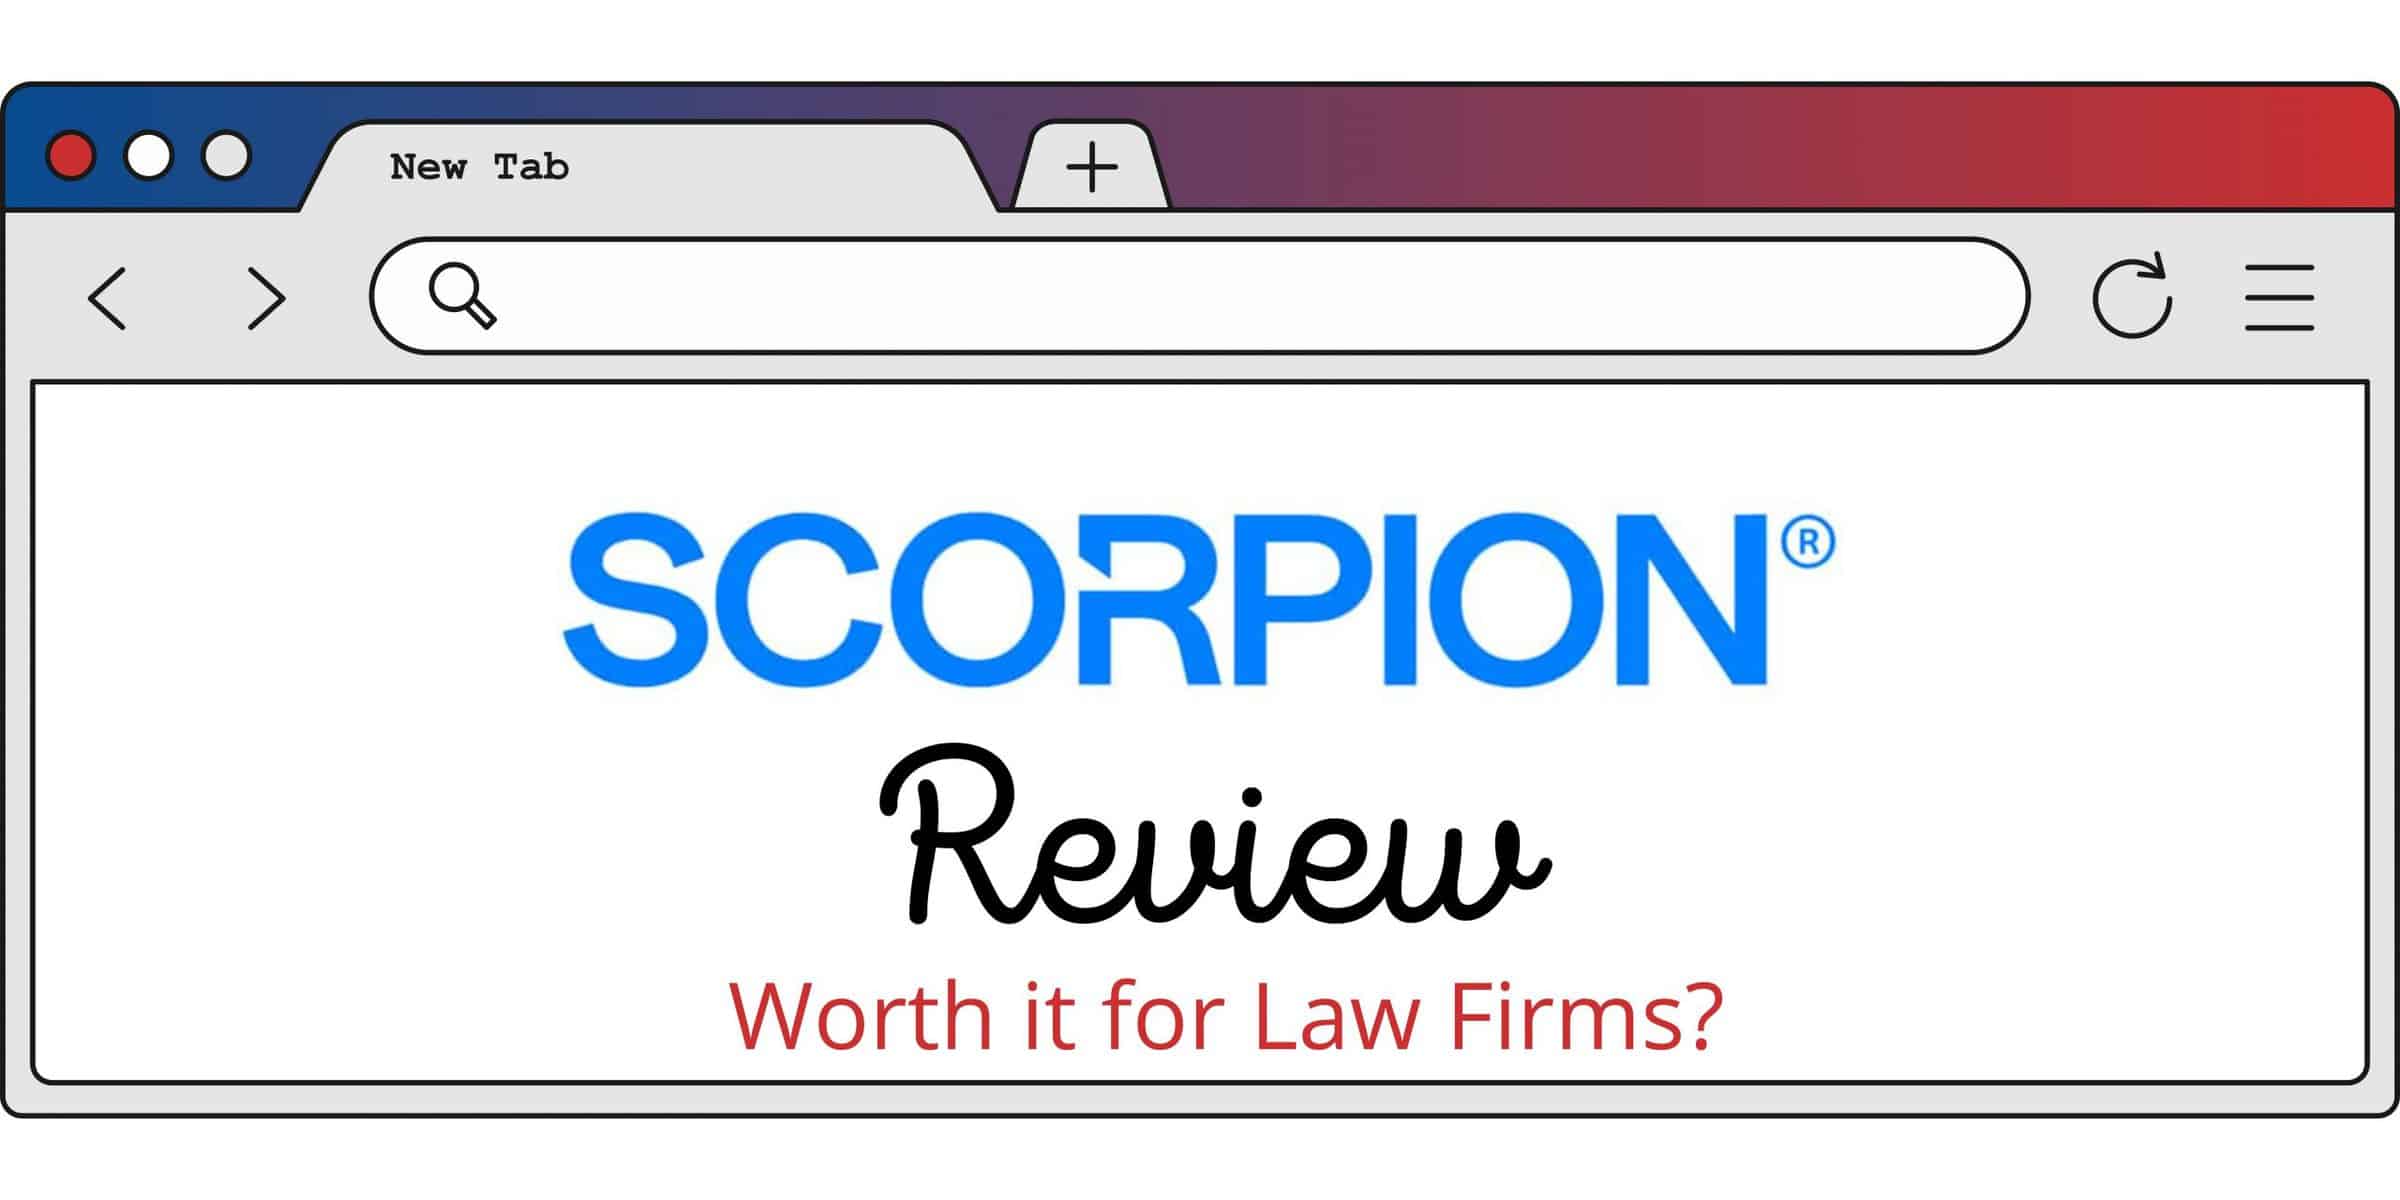 Scorpion Review Marketing for Law Firms